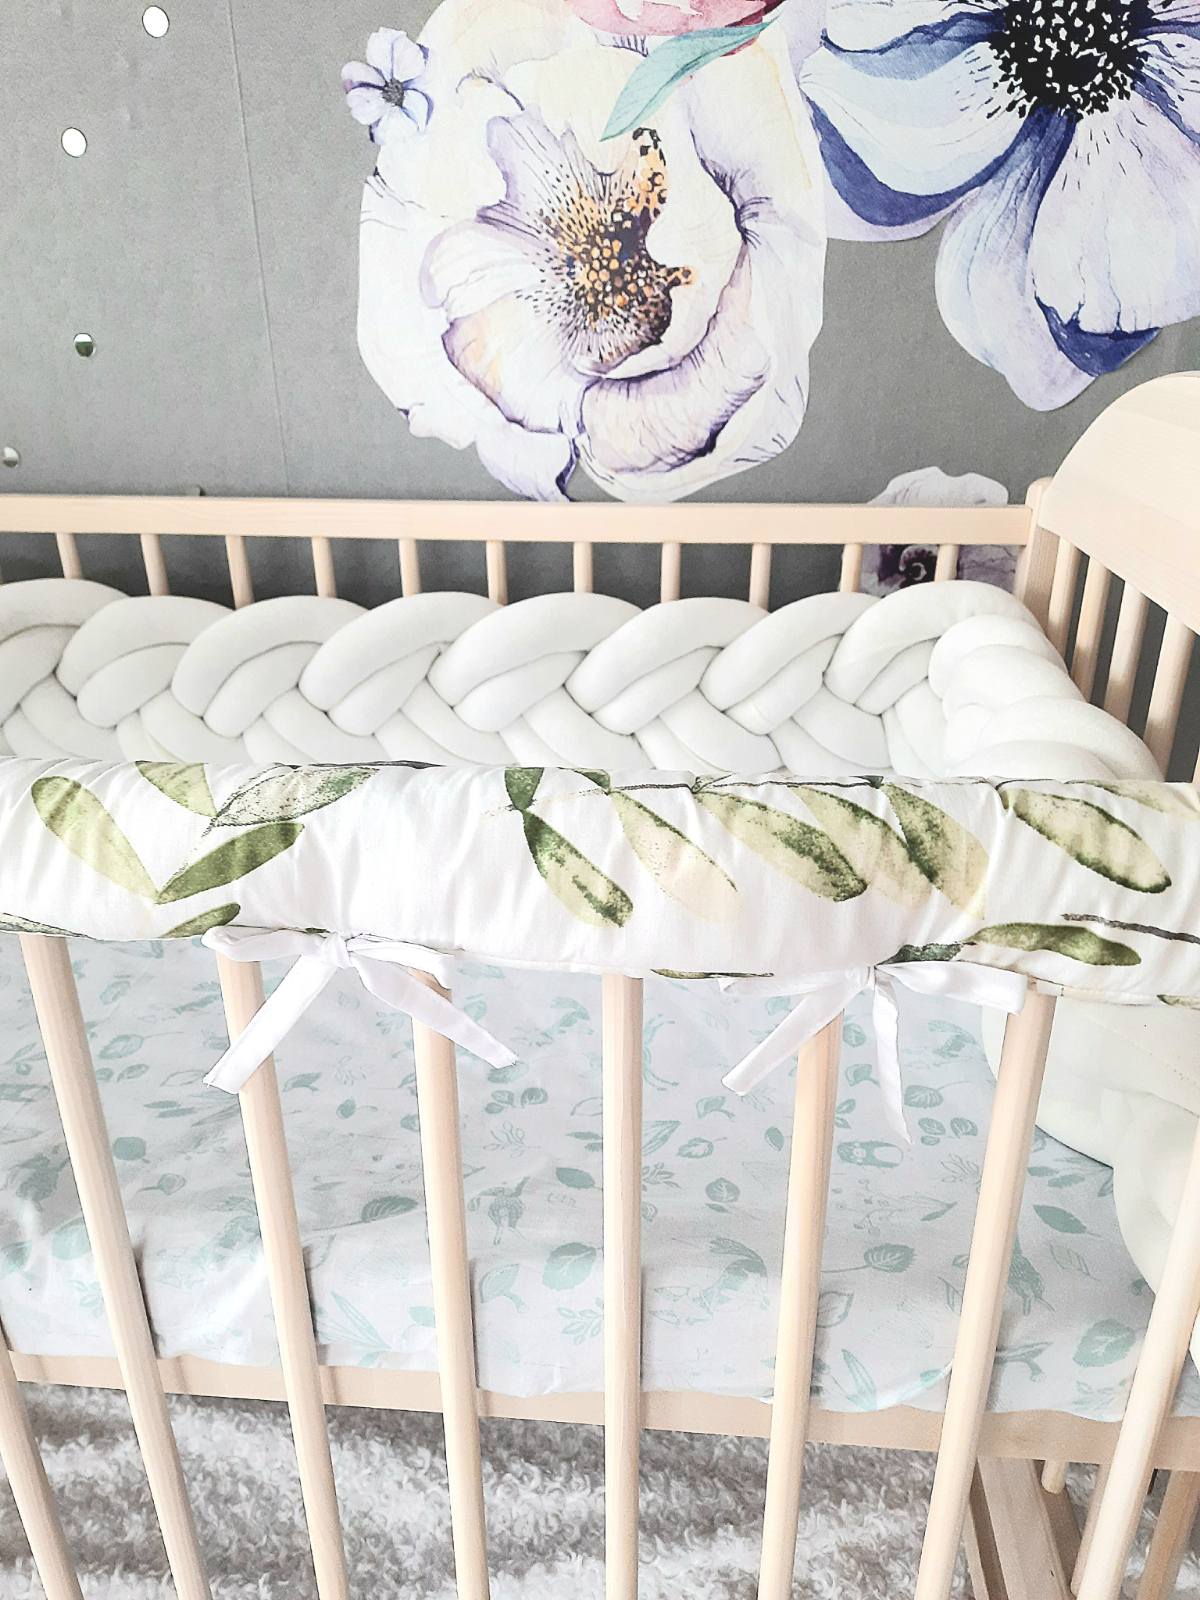 Cotton Rail Cover: Protect Your Baby's Crib in Style - Green Leaf